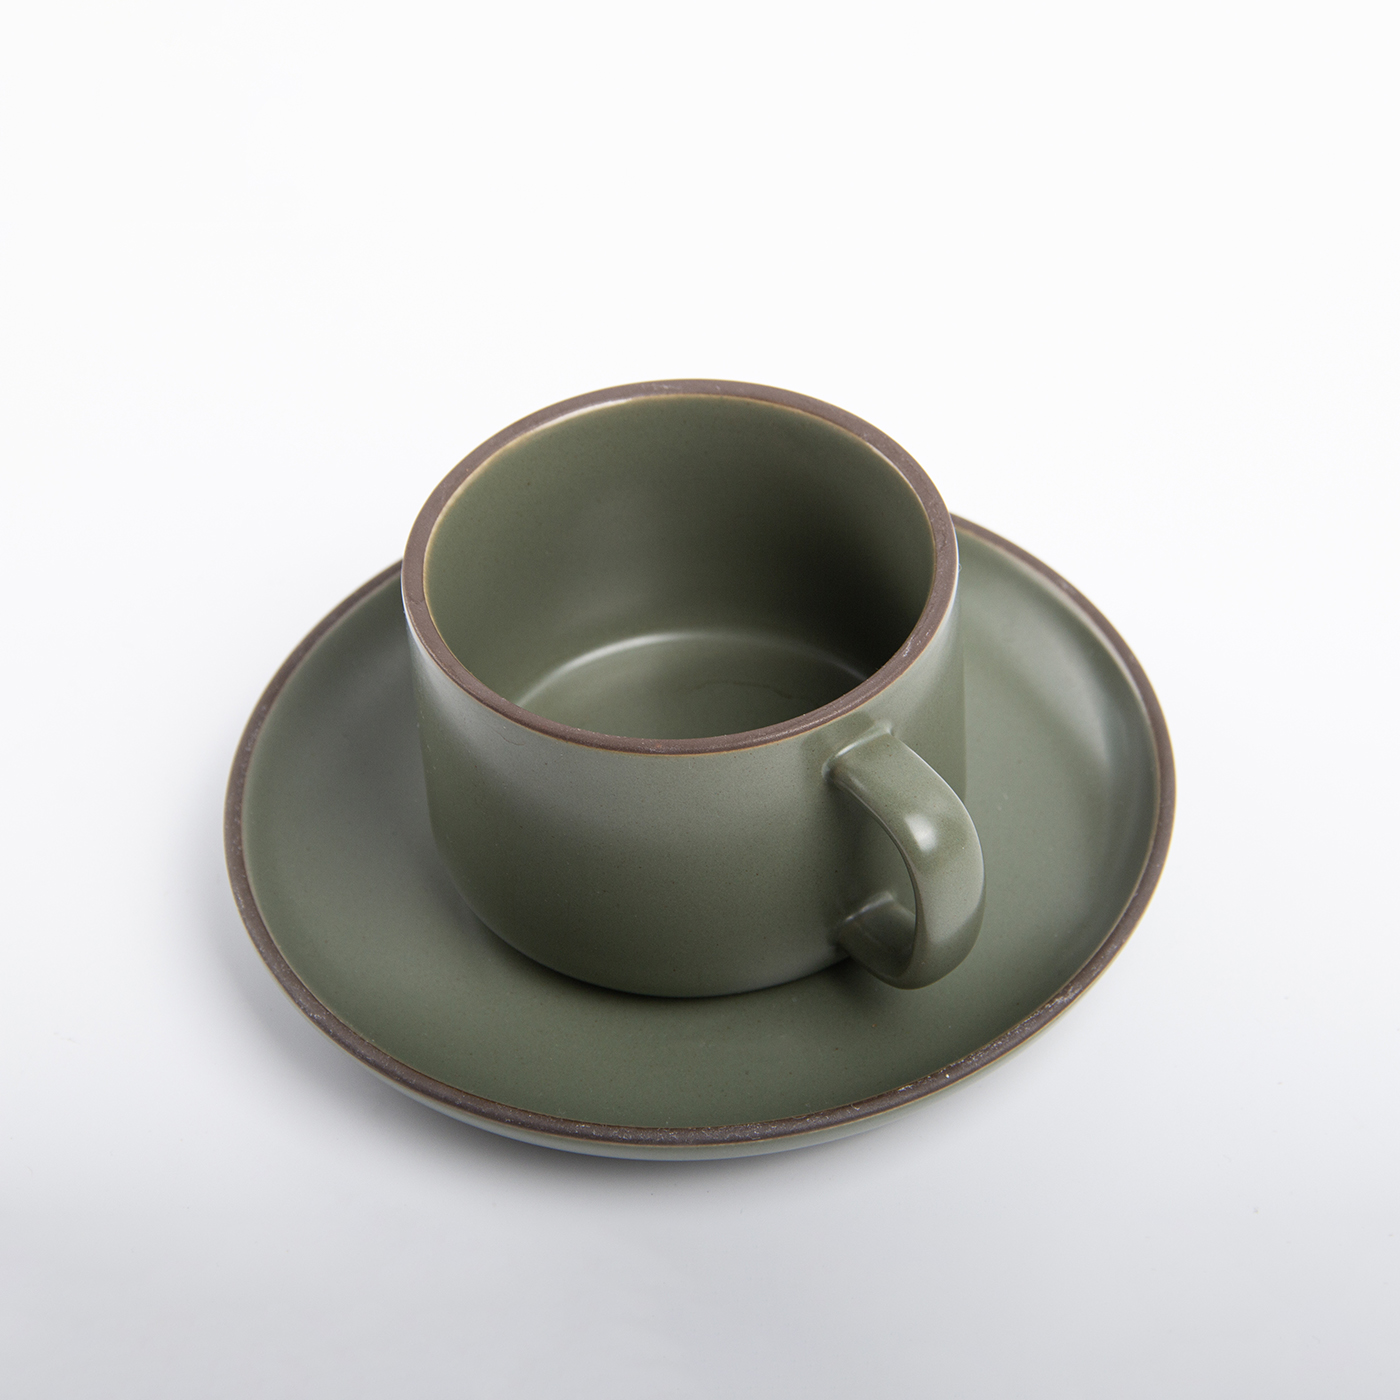 8 oz. Ceramic Coffee Cup With Saucer3